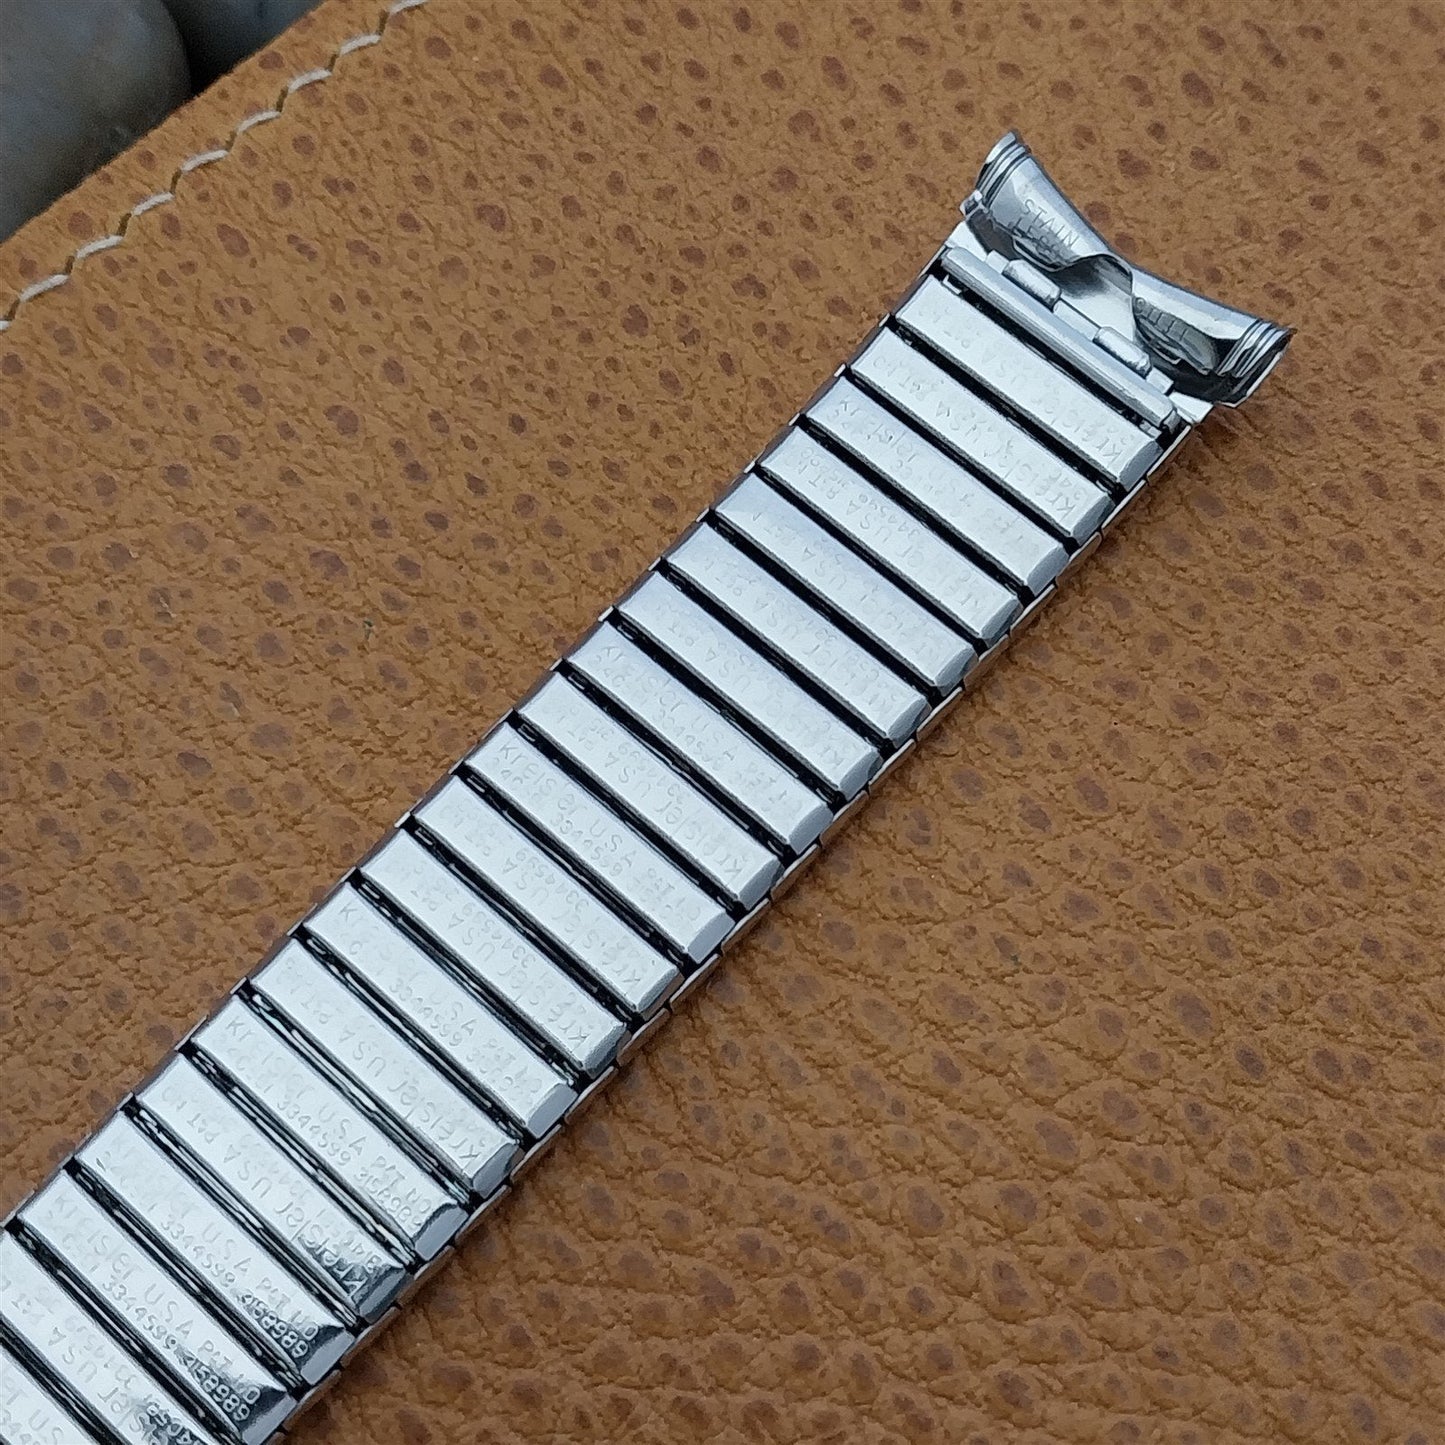 19mm 18mm nos Kreisler USA Made Stainless Steel Long New Old Vintage Watch Band